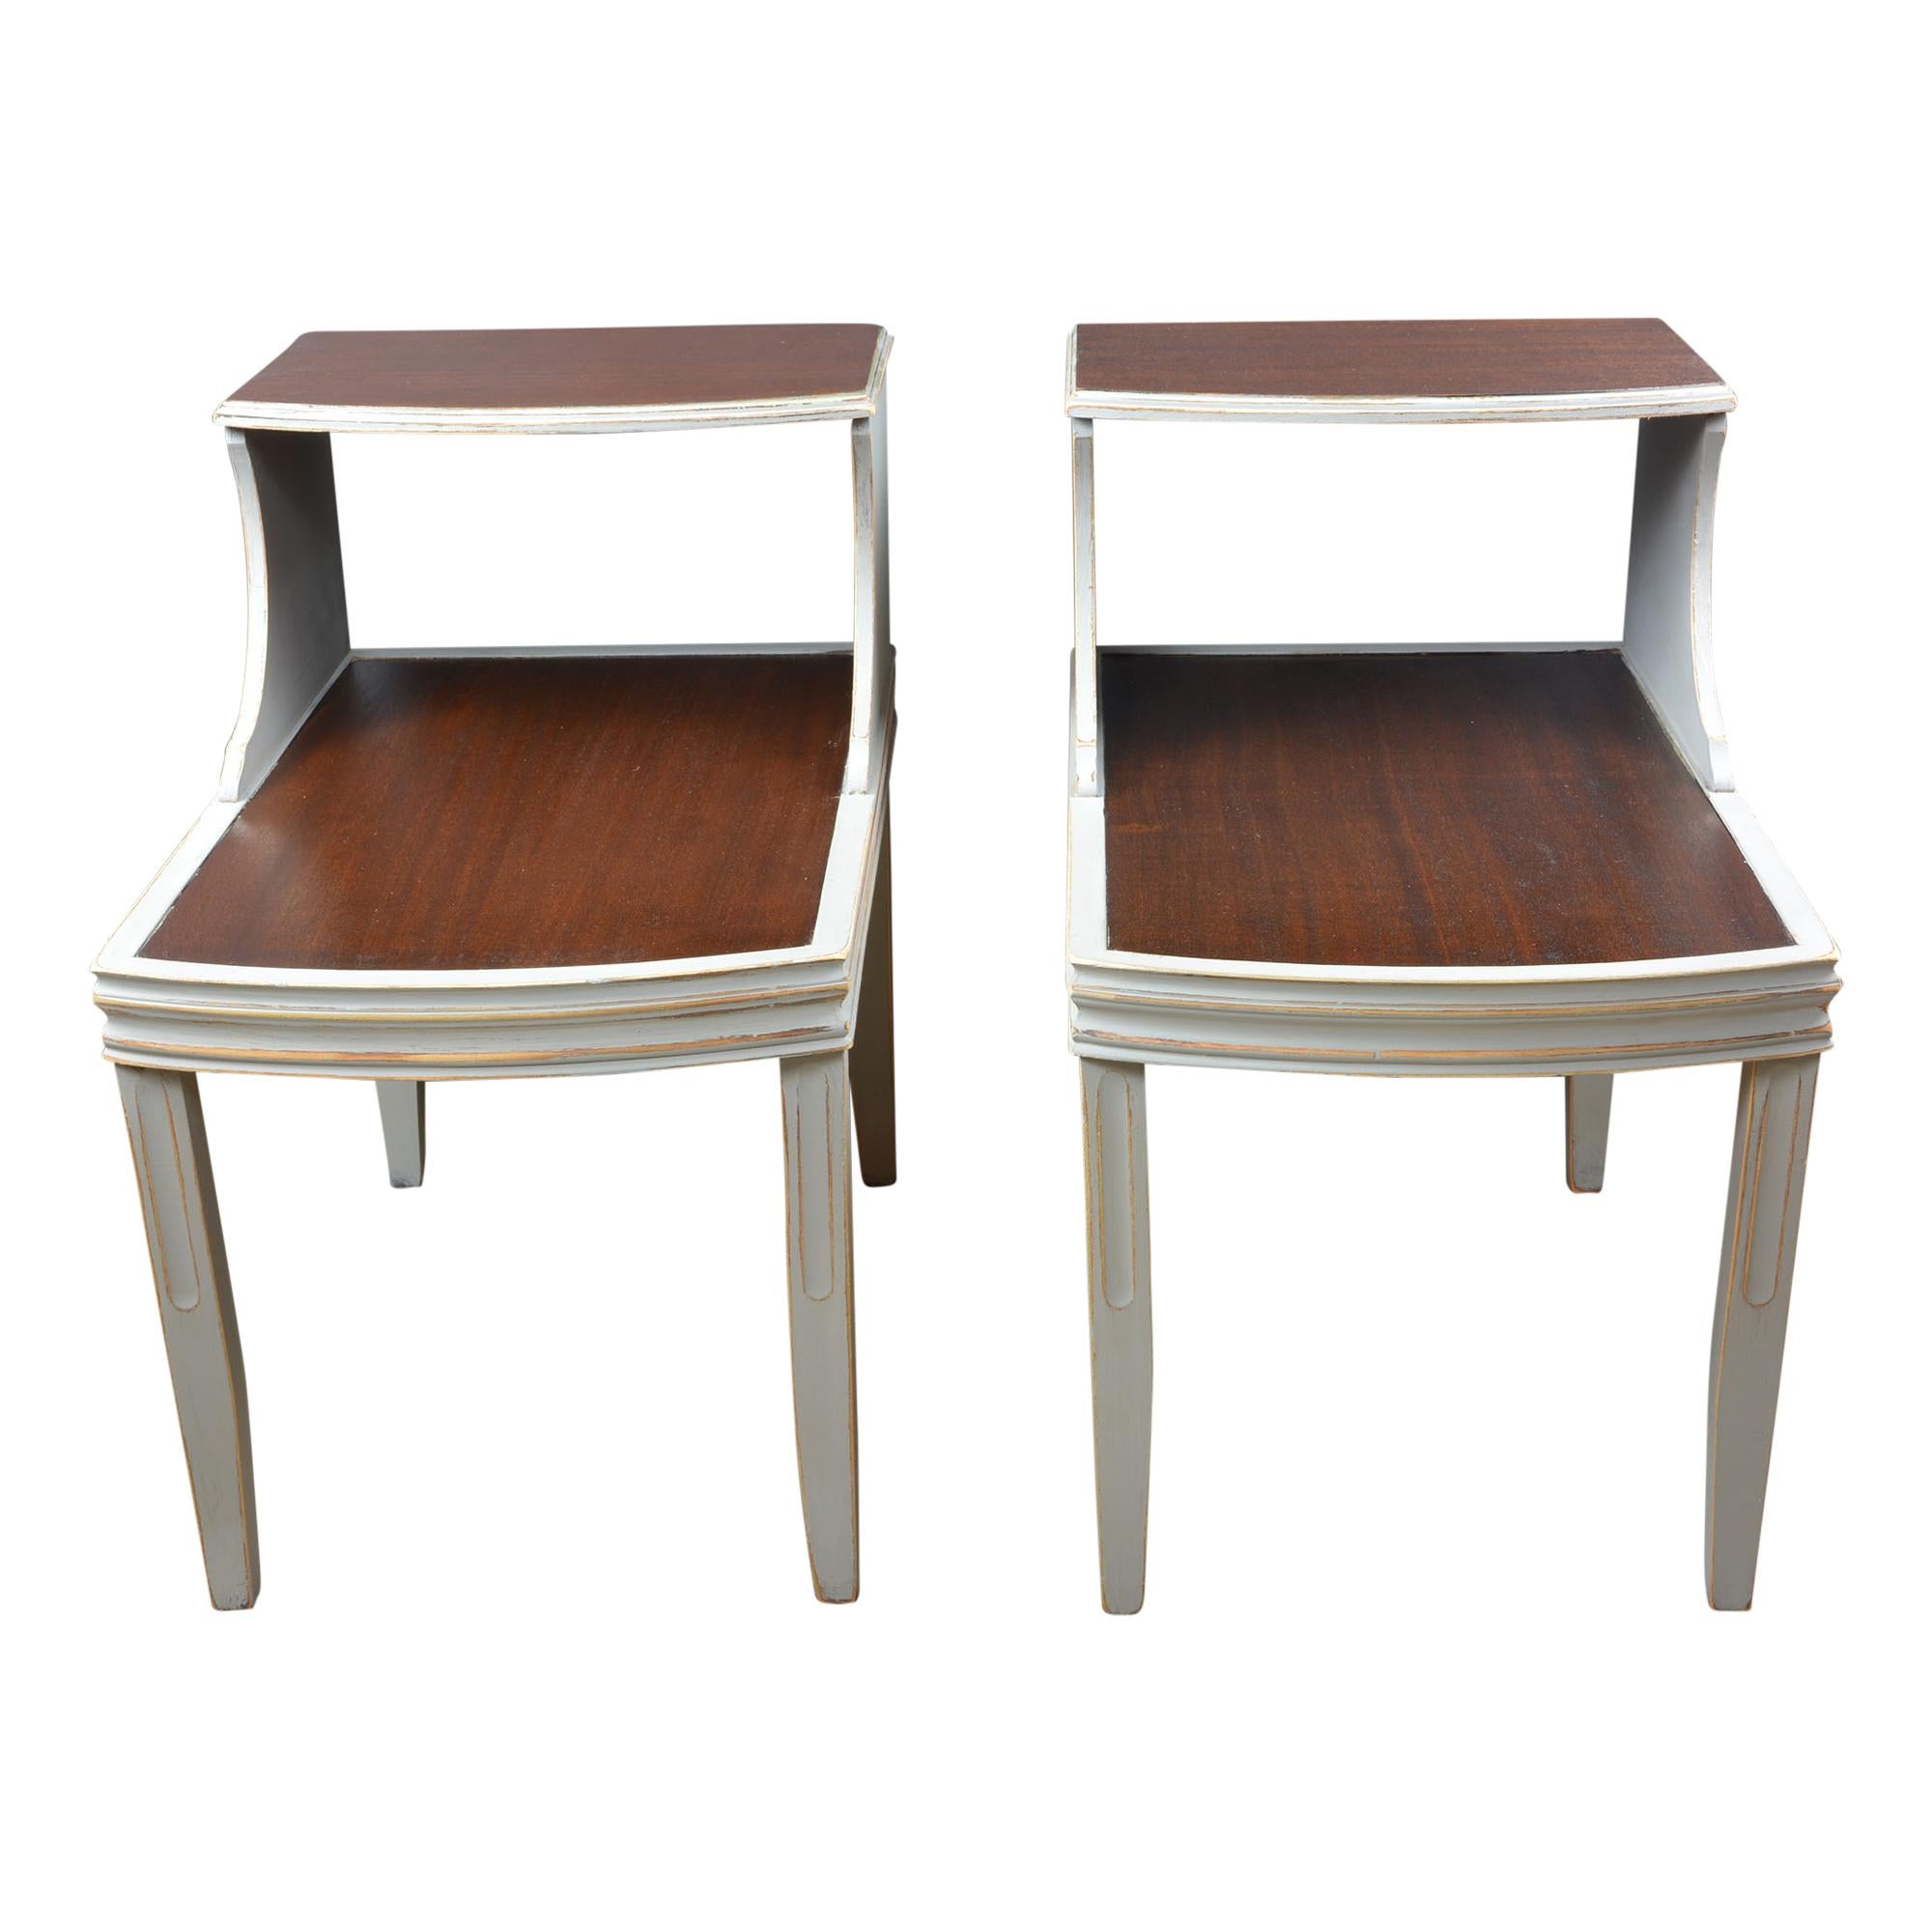 The clean lines of these MCM end tables are such a classic look of the time. They feature the two levels of table tops which was so popular at the time. The pair are recently hand painted gray and multi-layered browns. The sleeker design and slender